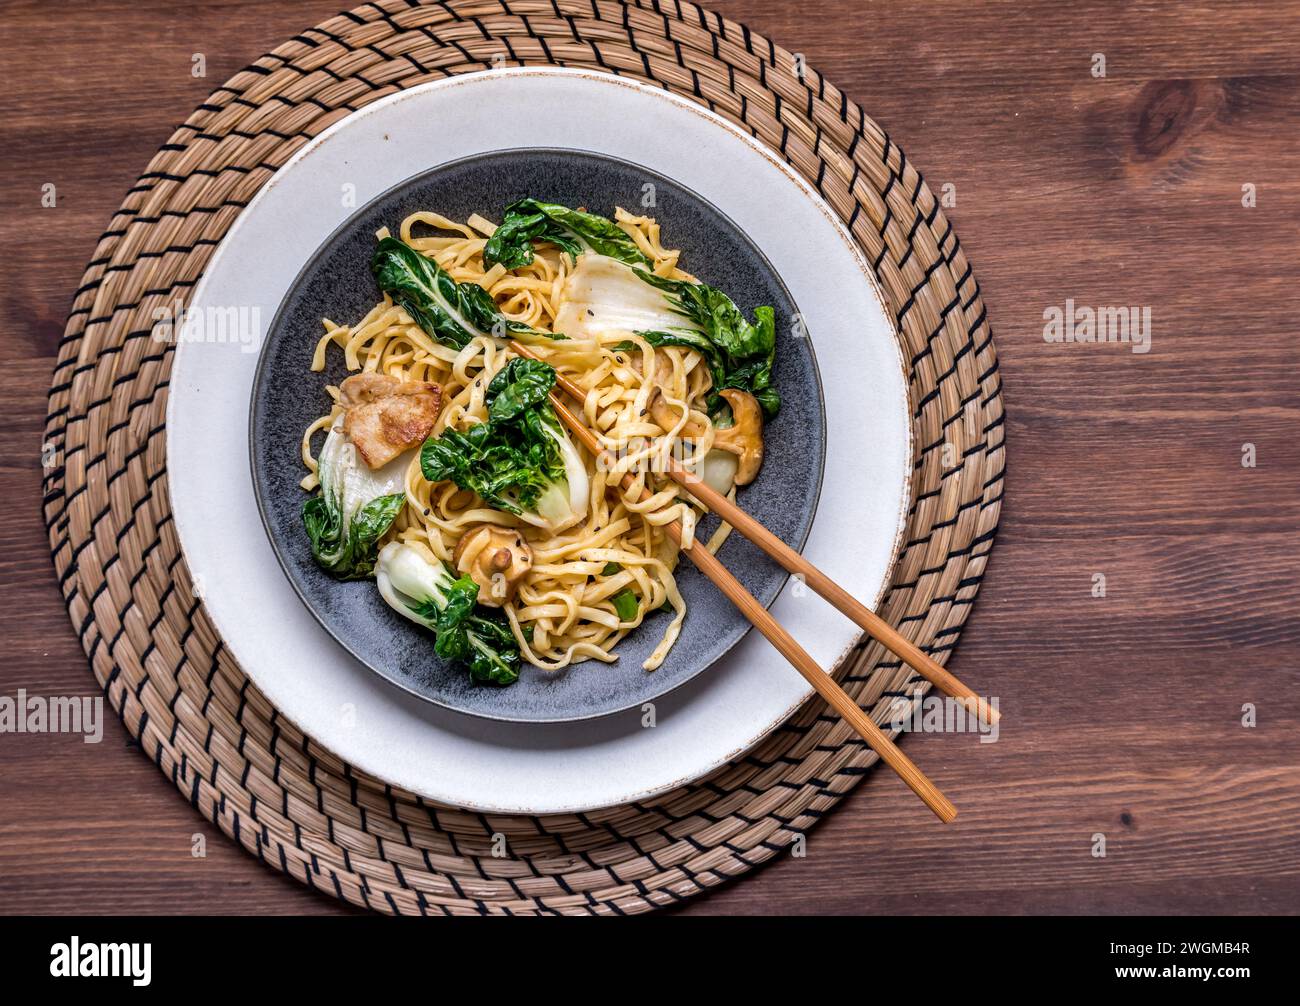 A dish of lo mein noodles with baby bok choy, cremini mushrooms and pork. Stock Photo